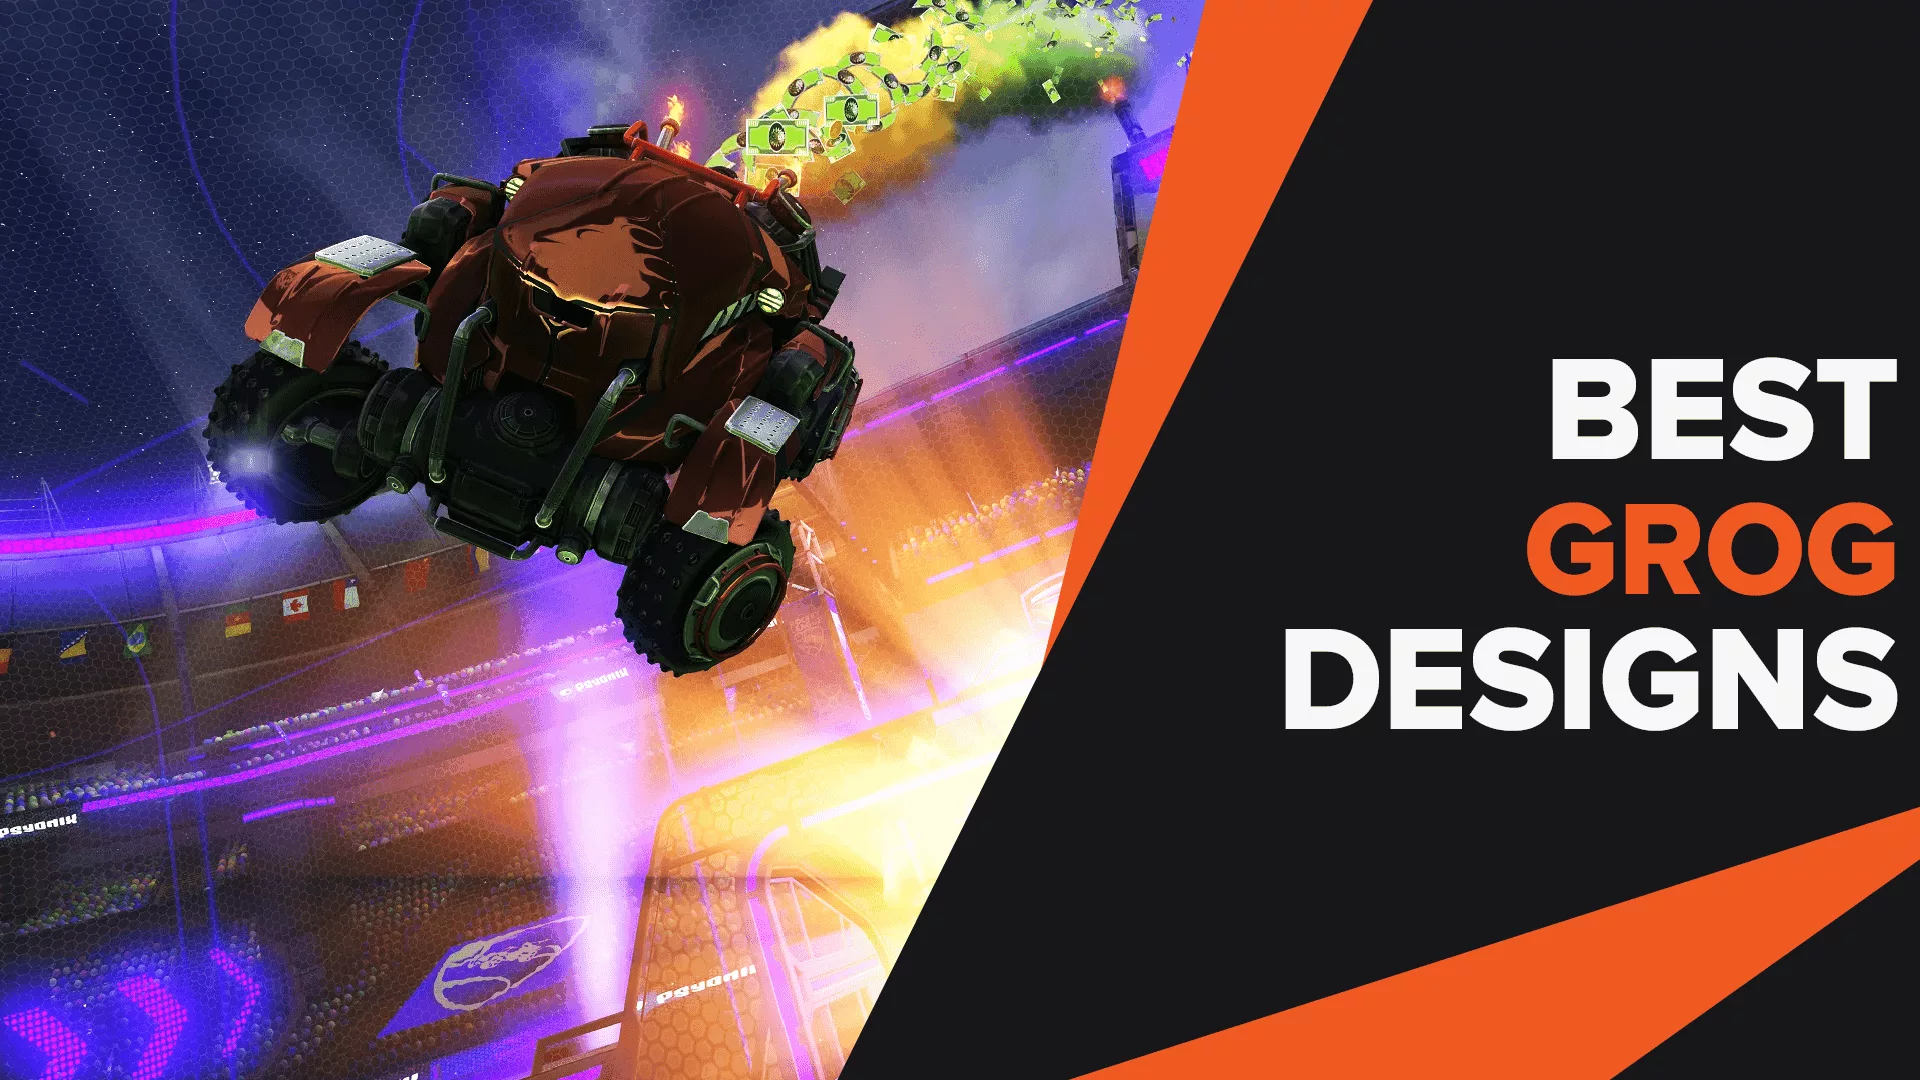 Best Grog Designs That Will Make Everyone Envious in Rocket League